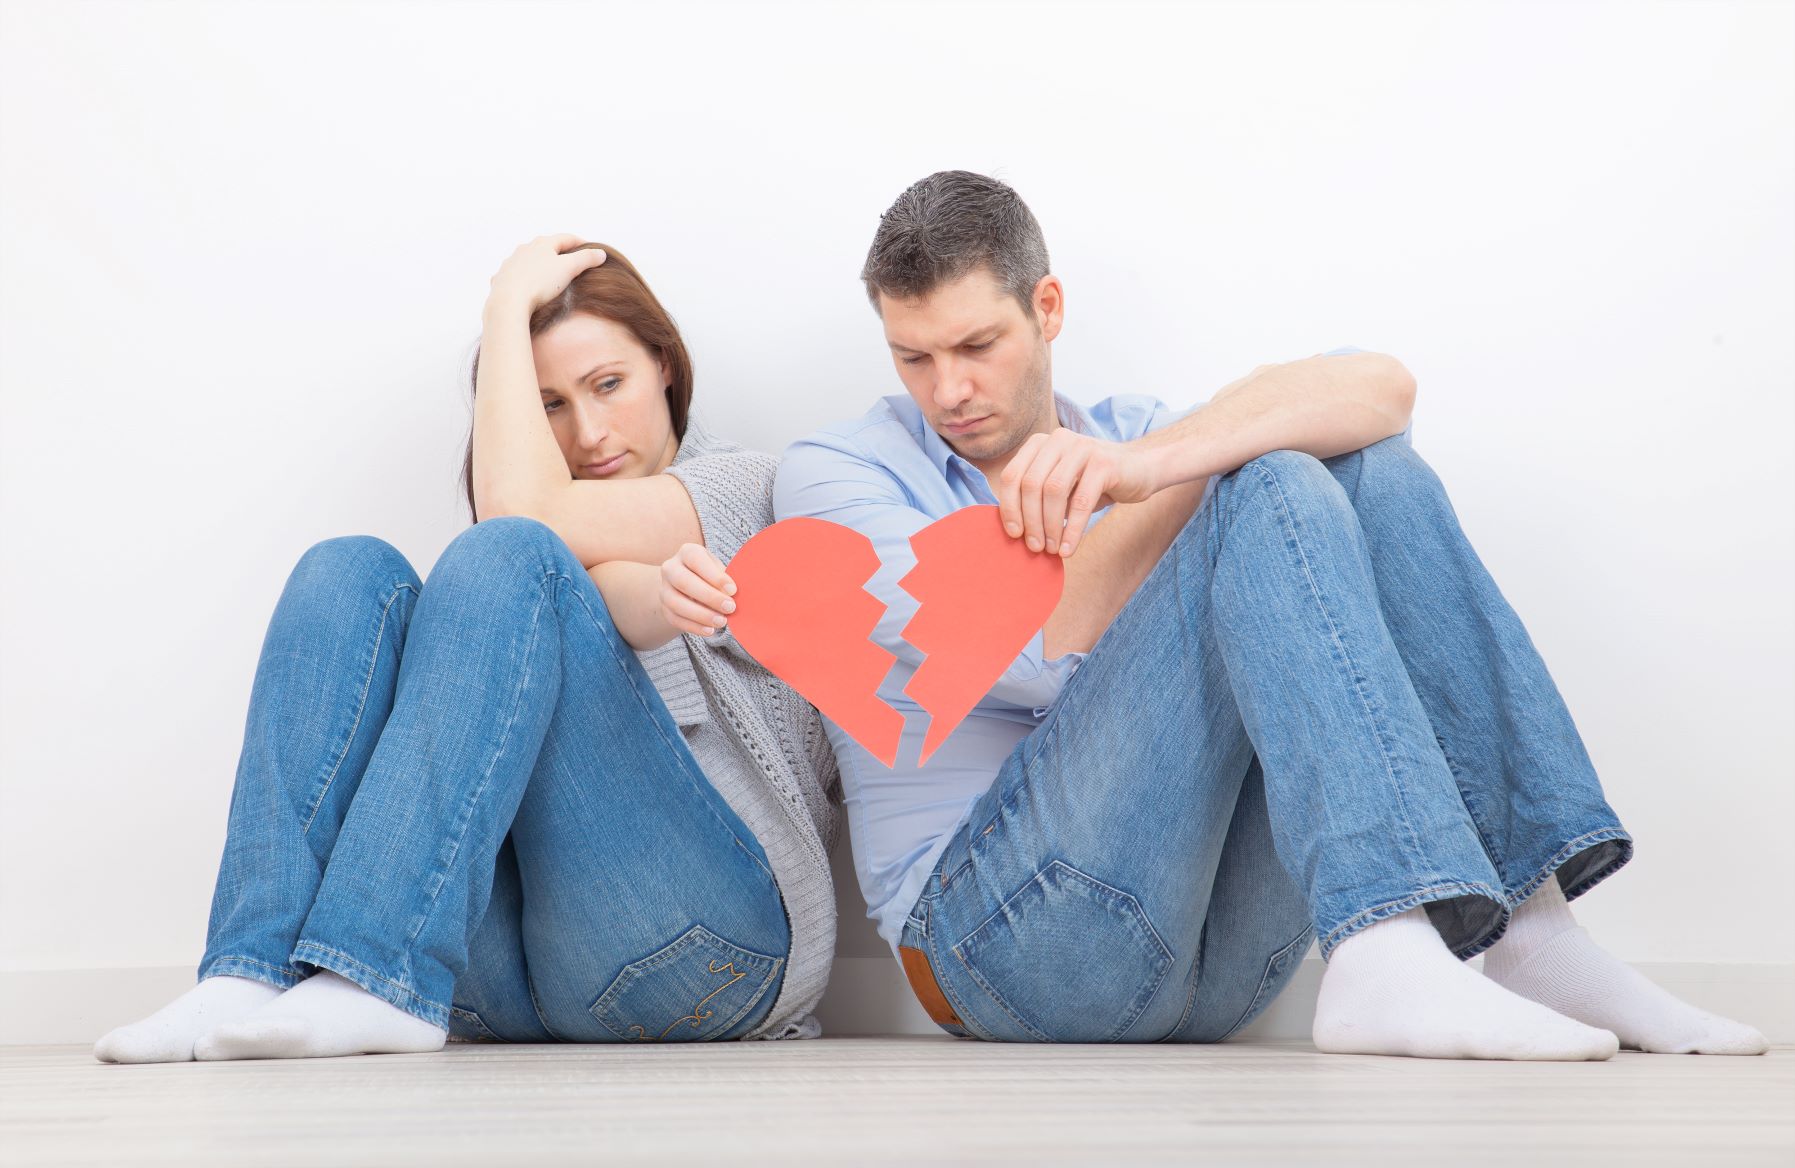 Repairing Relationships After Recovery